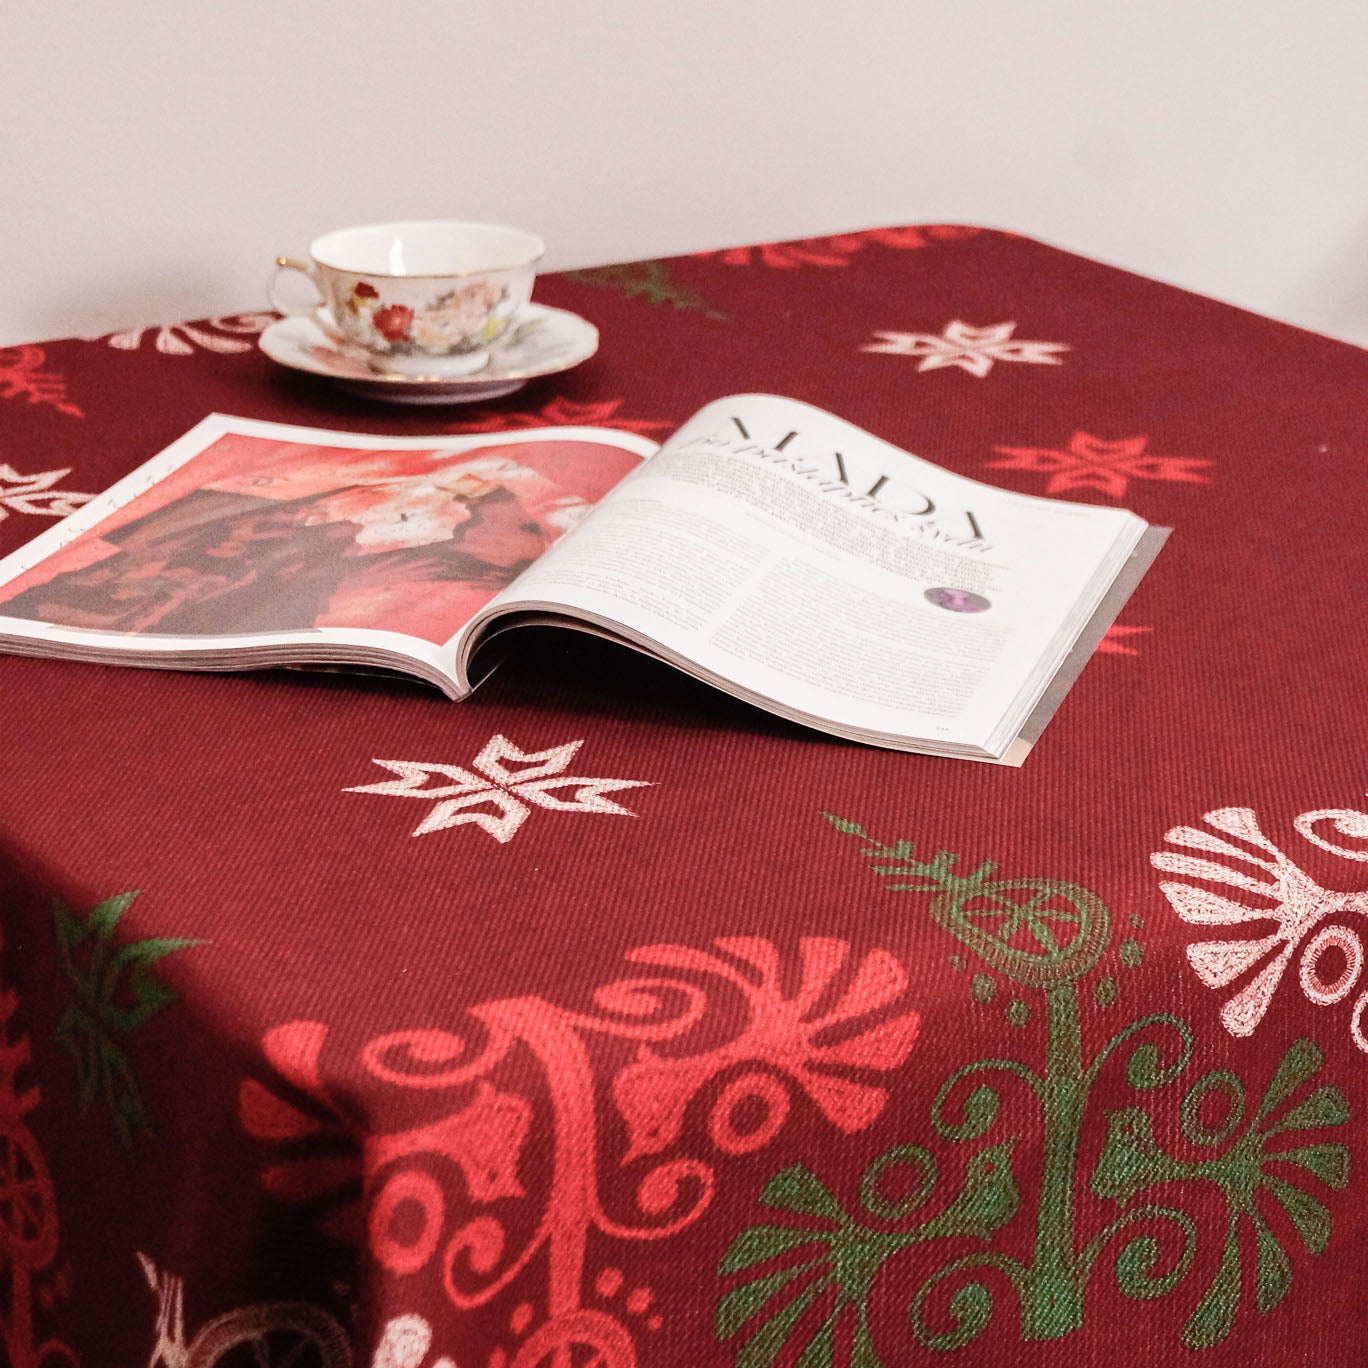 Tablecloth made of recycled fabric "Ethno Christmas #3"